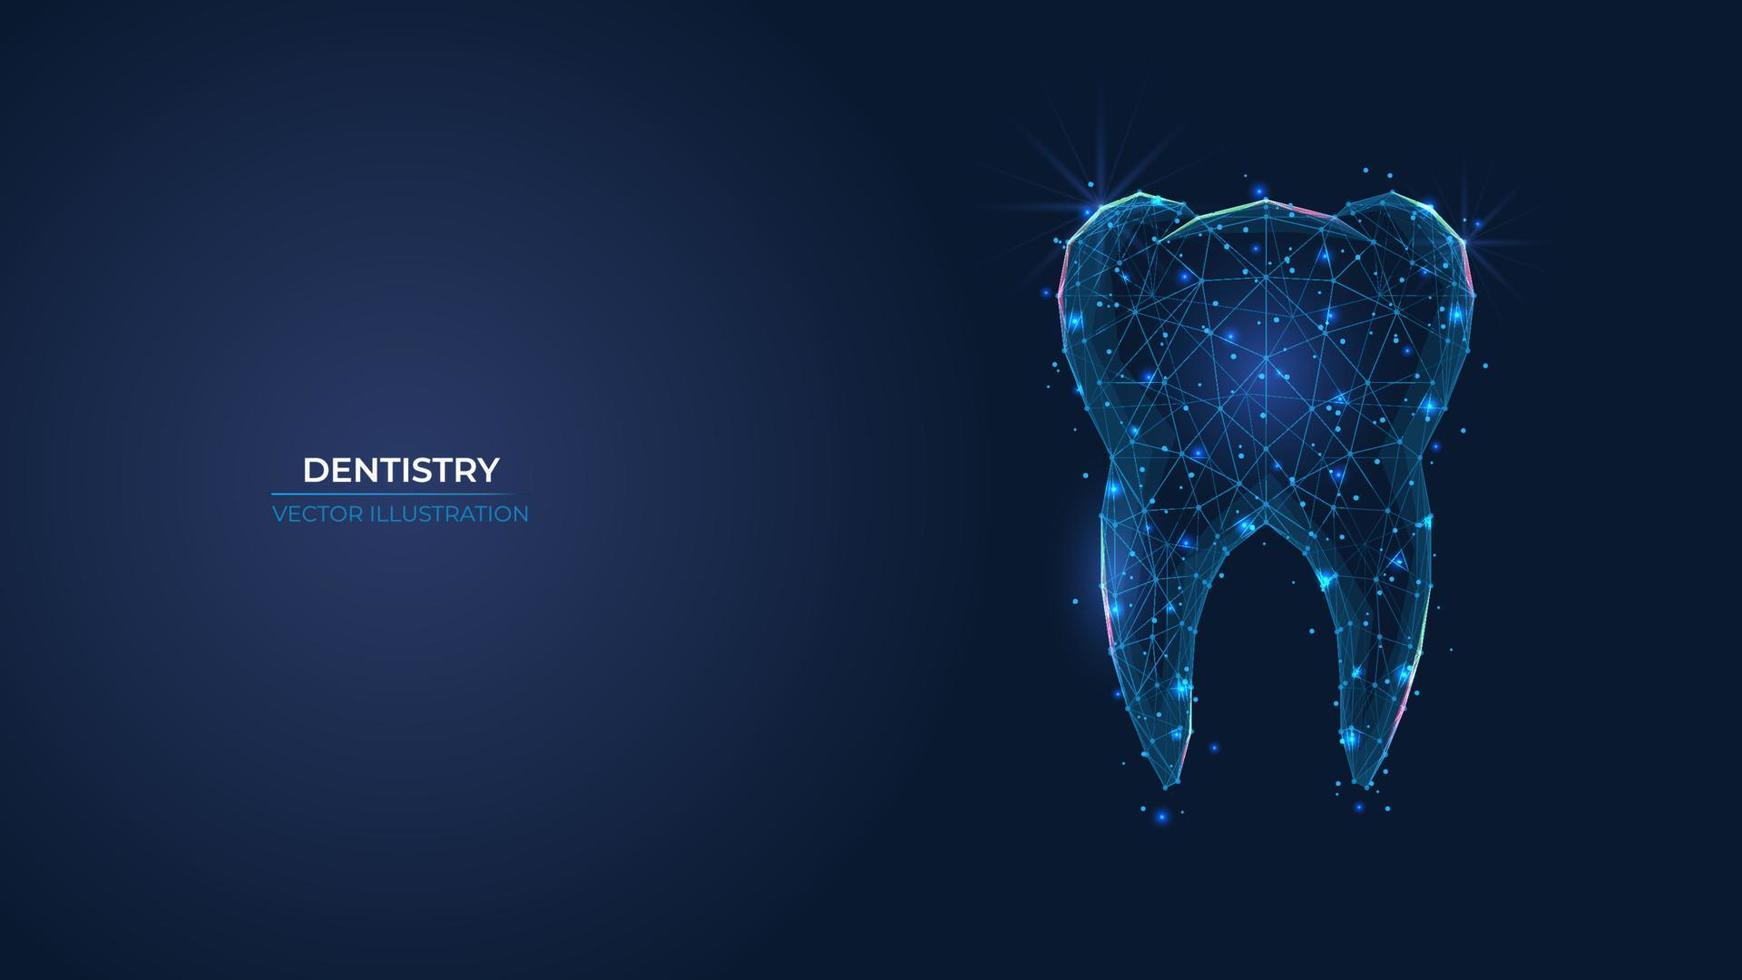 Futuristic abstract tooth symbol. Dental treatment concept. Low poly geometric 3d wallpaper background vector illustration.